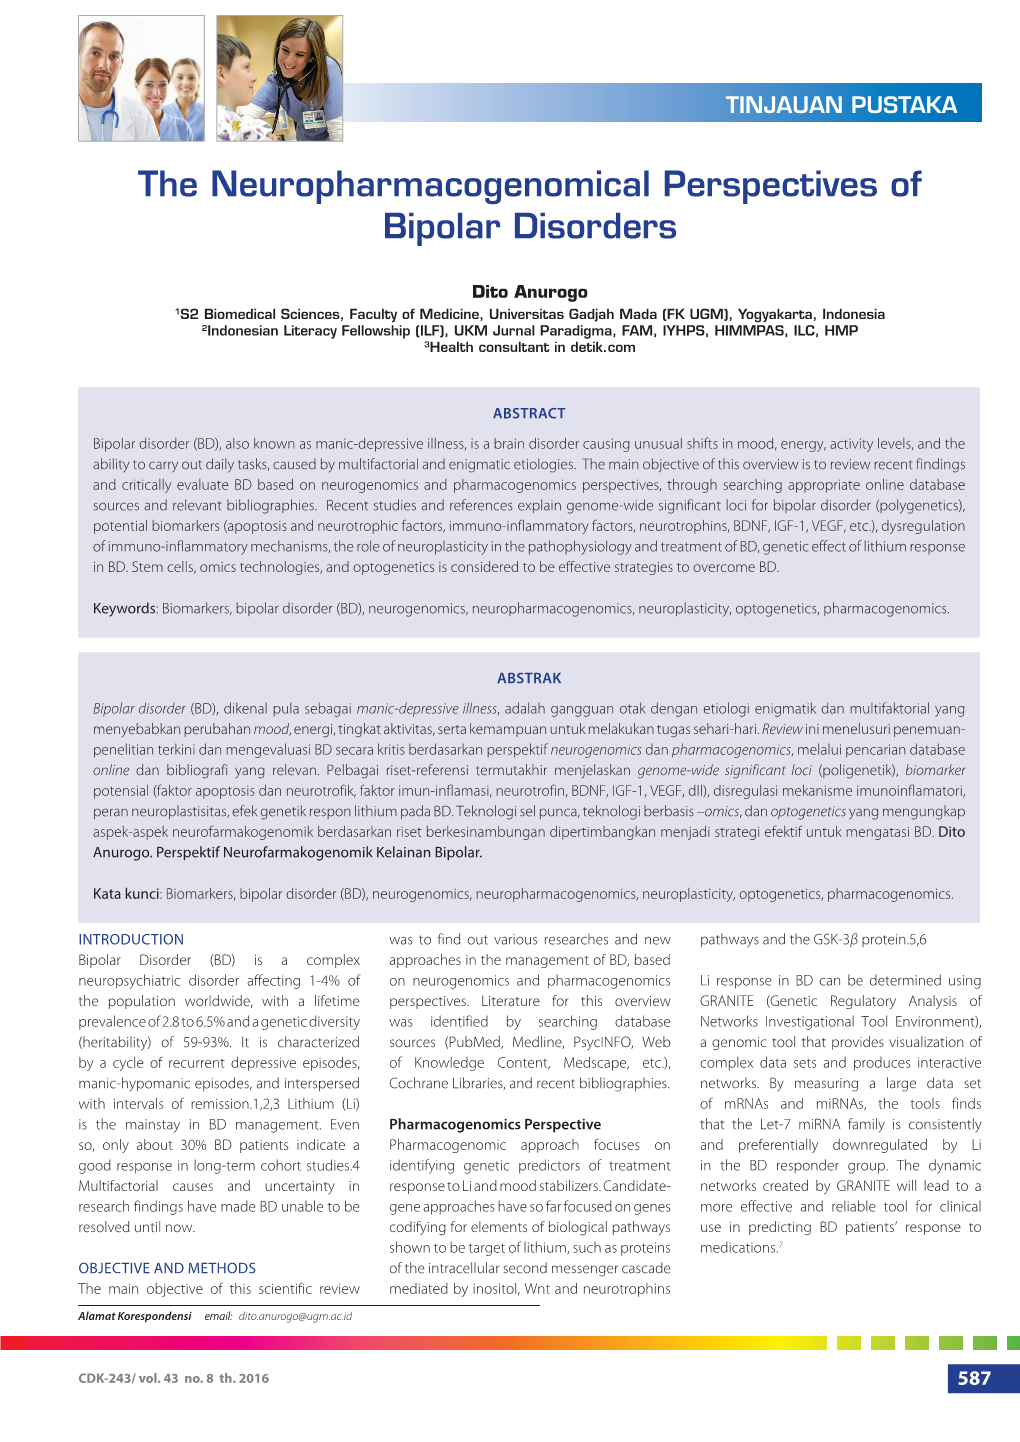 The Neuropharmacogenomical Perspectives of Bipolar Disorders